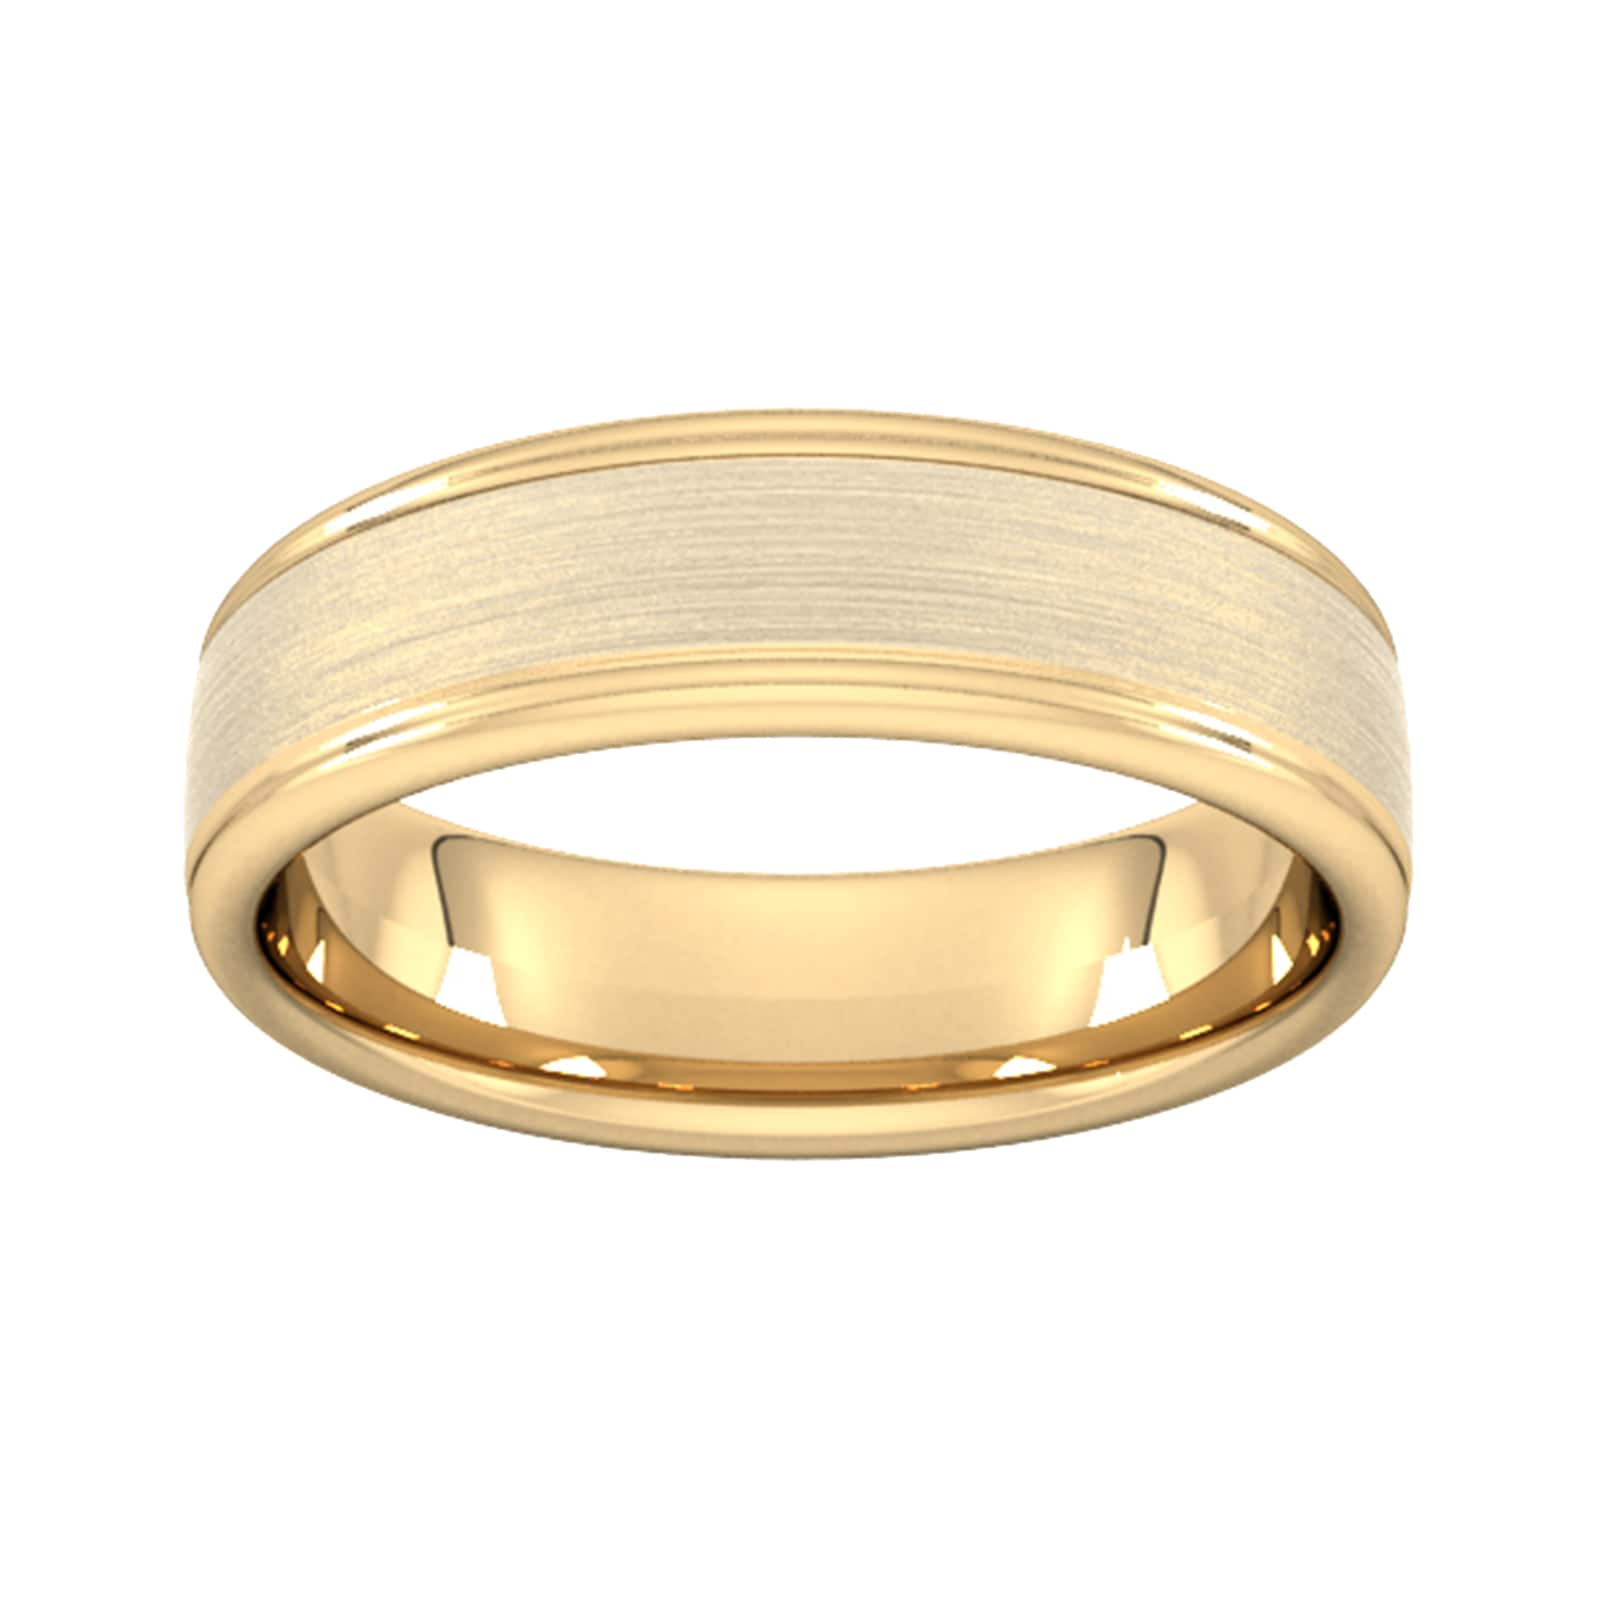 6mm Slight Court Extra Heavy Matt Centre With Grooves Wedding Ring In 18 Carat Yellow Gold - Ring Size X